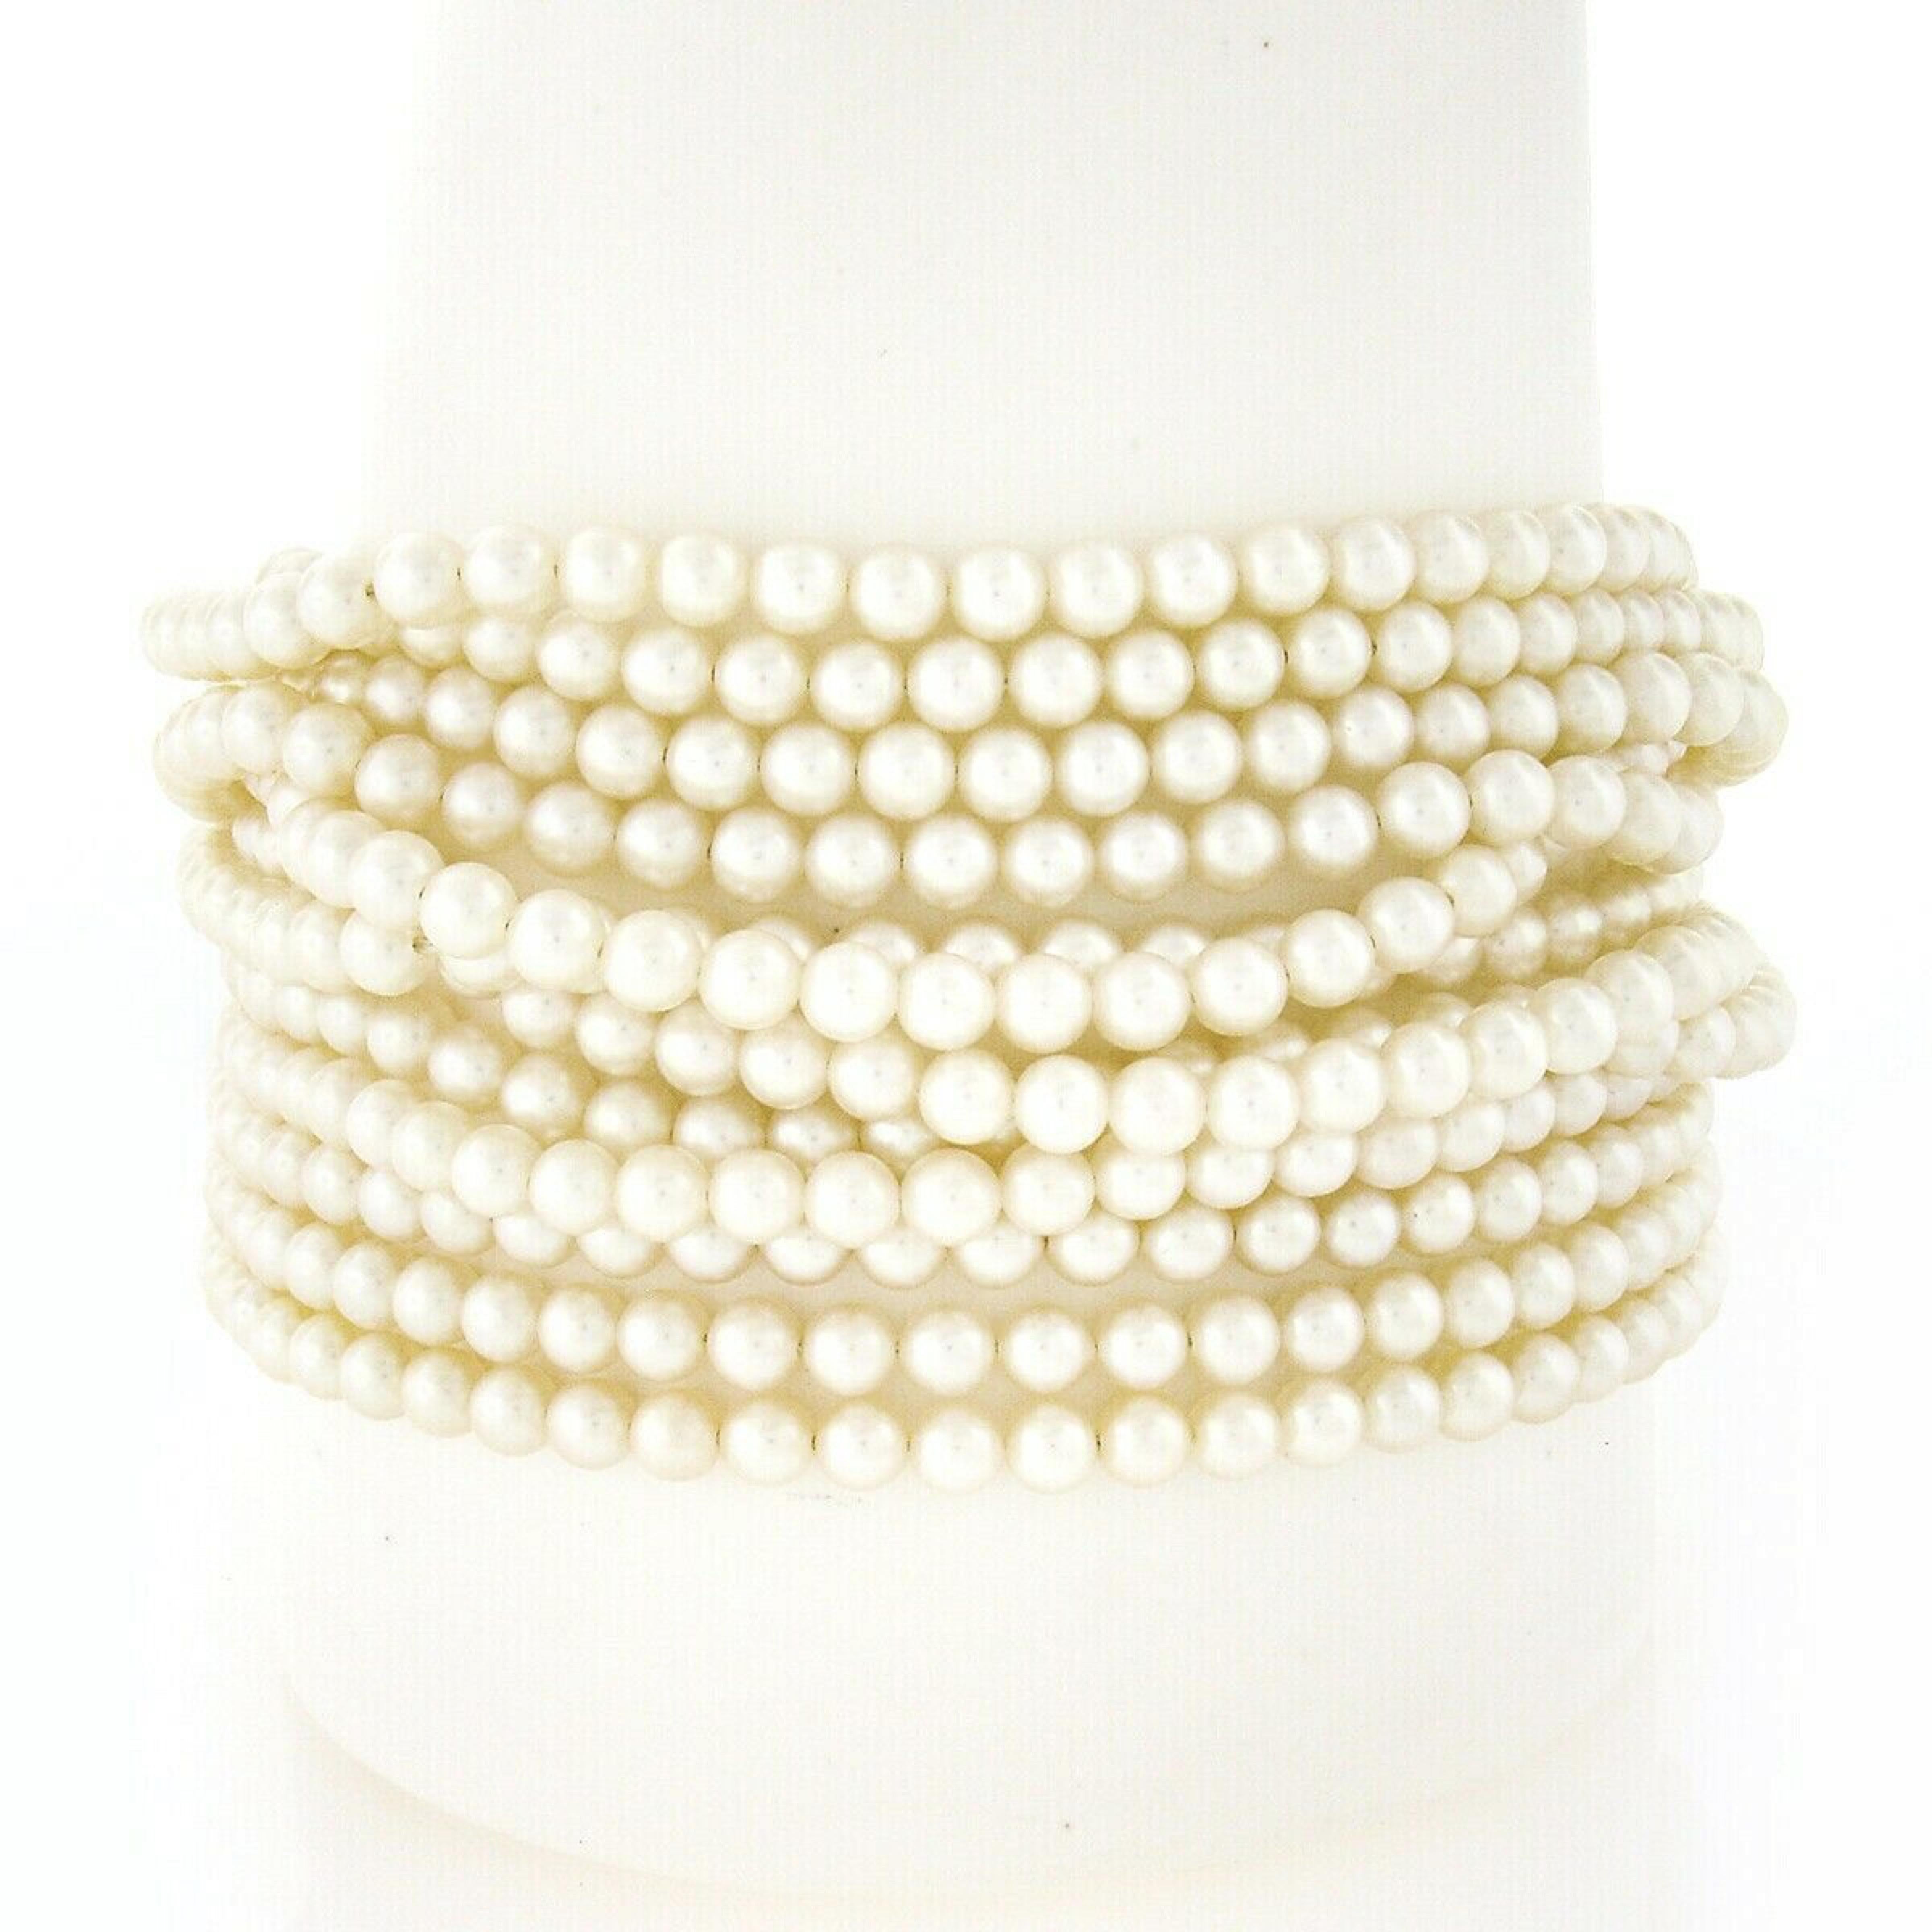 This magnificent vintage bracelet features 12 strands of round cultured pearls with a large textured clasp crafted from solid 18k yellow gold. The very fine quality pearls are well matched in size and nice white color, and are absolutely gorgeous